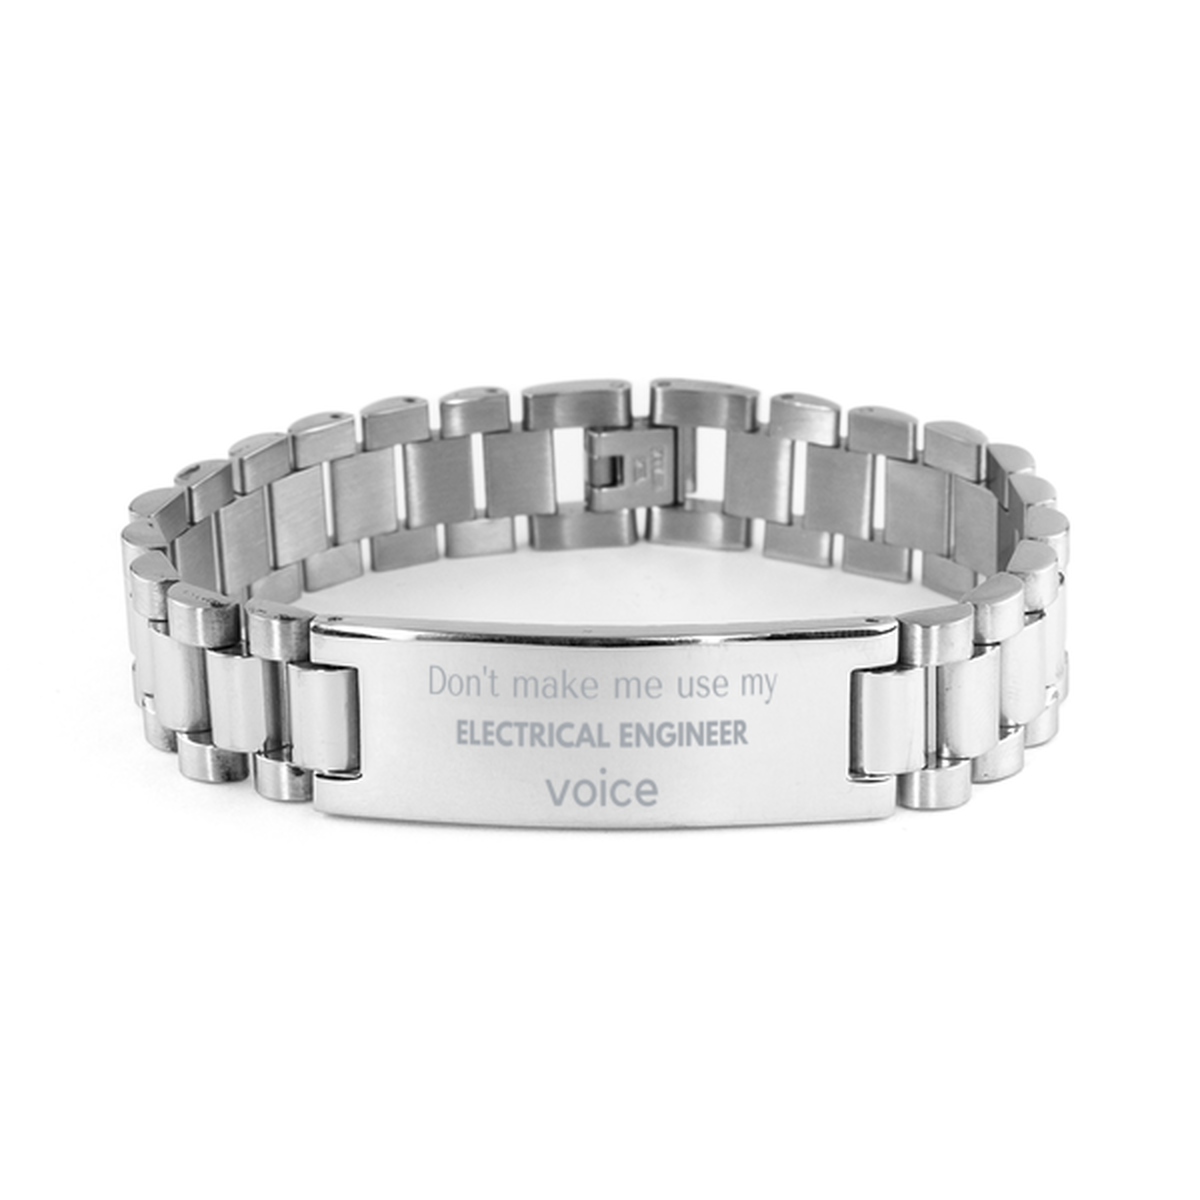 Don't make me use my Electrical Engineer voice, Sarcasm Electrical Engineer Gifts, Christmas Electrical Engineer Ladder Stainless Steel Bracelet Birthday Unique Gifts For Electrical Engineer Coworkers, Men, Women, Colleague, Friends